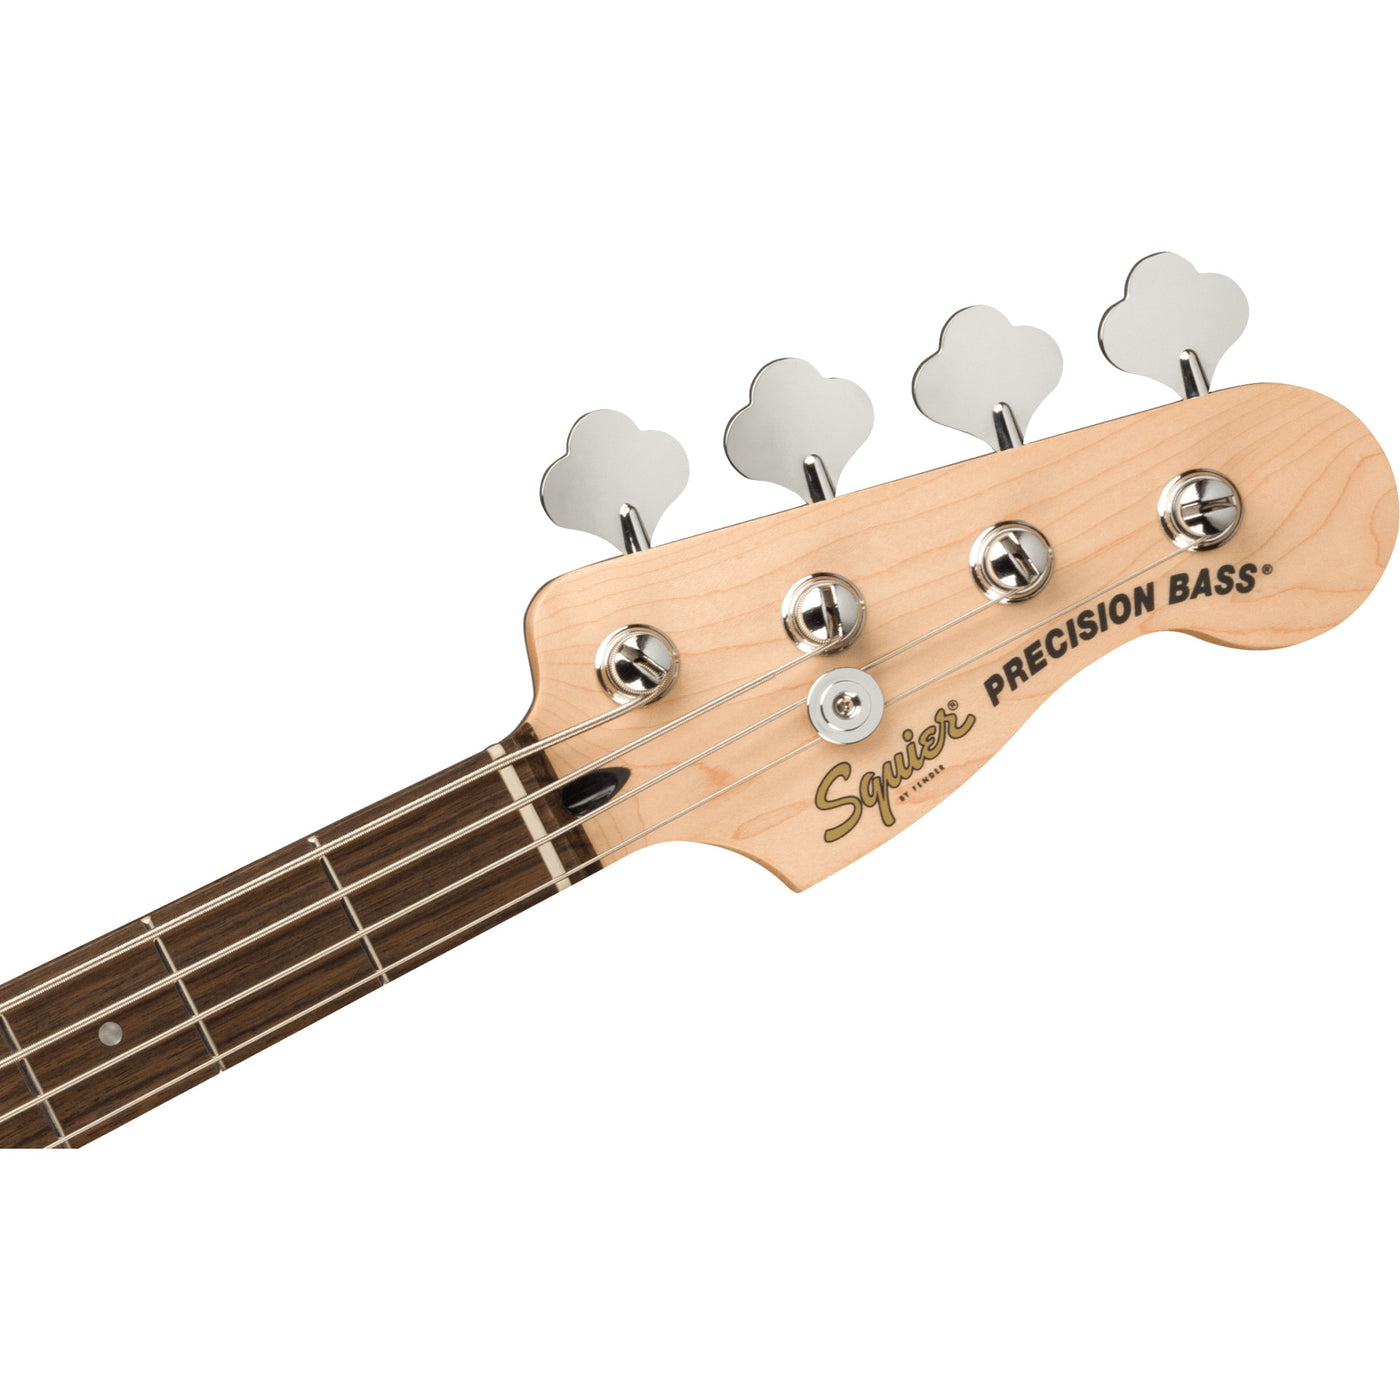 Fender Affinity Series Precision Bass PJ, Charcoal Frost Metallic (0378551569)